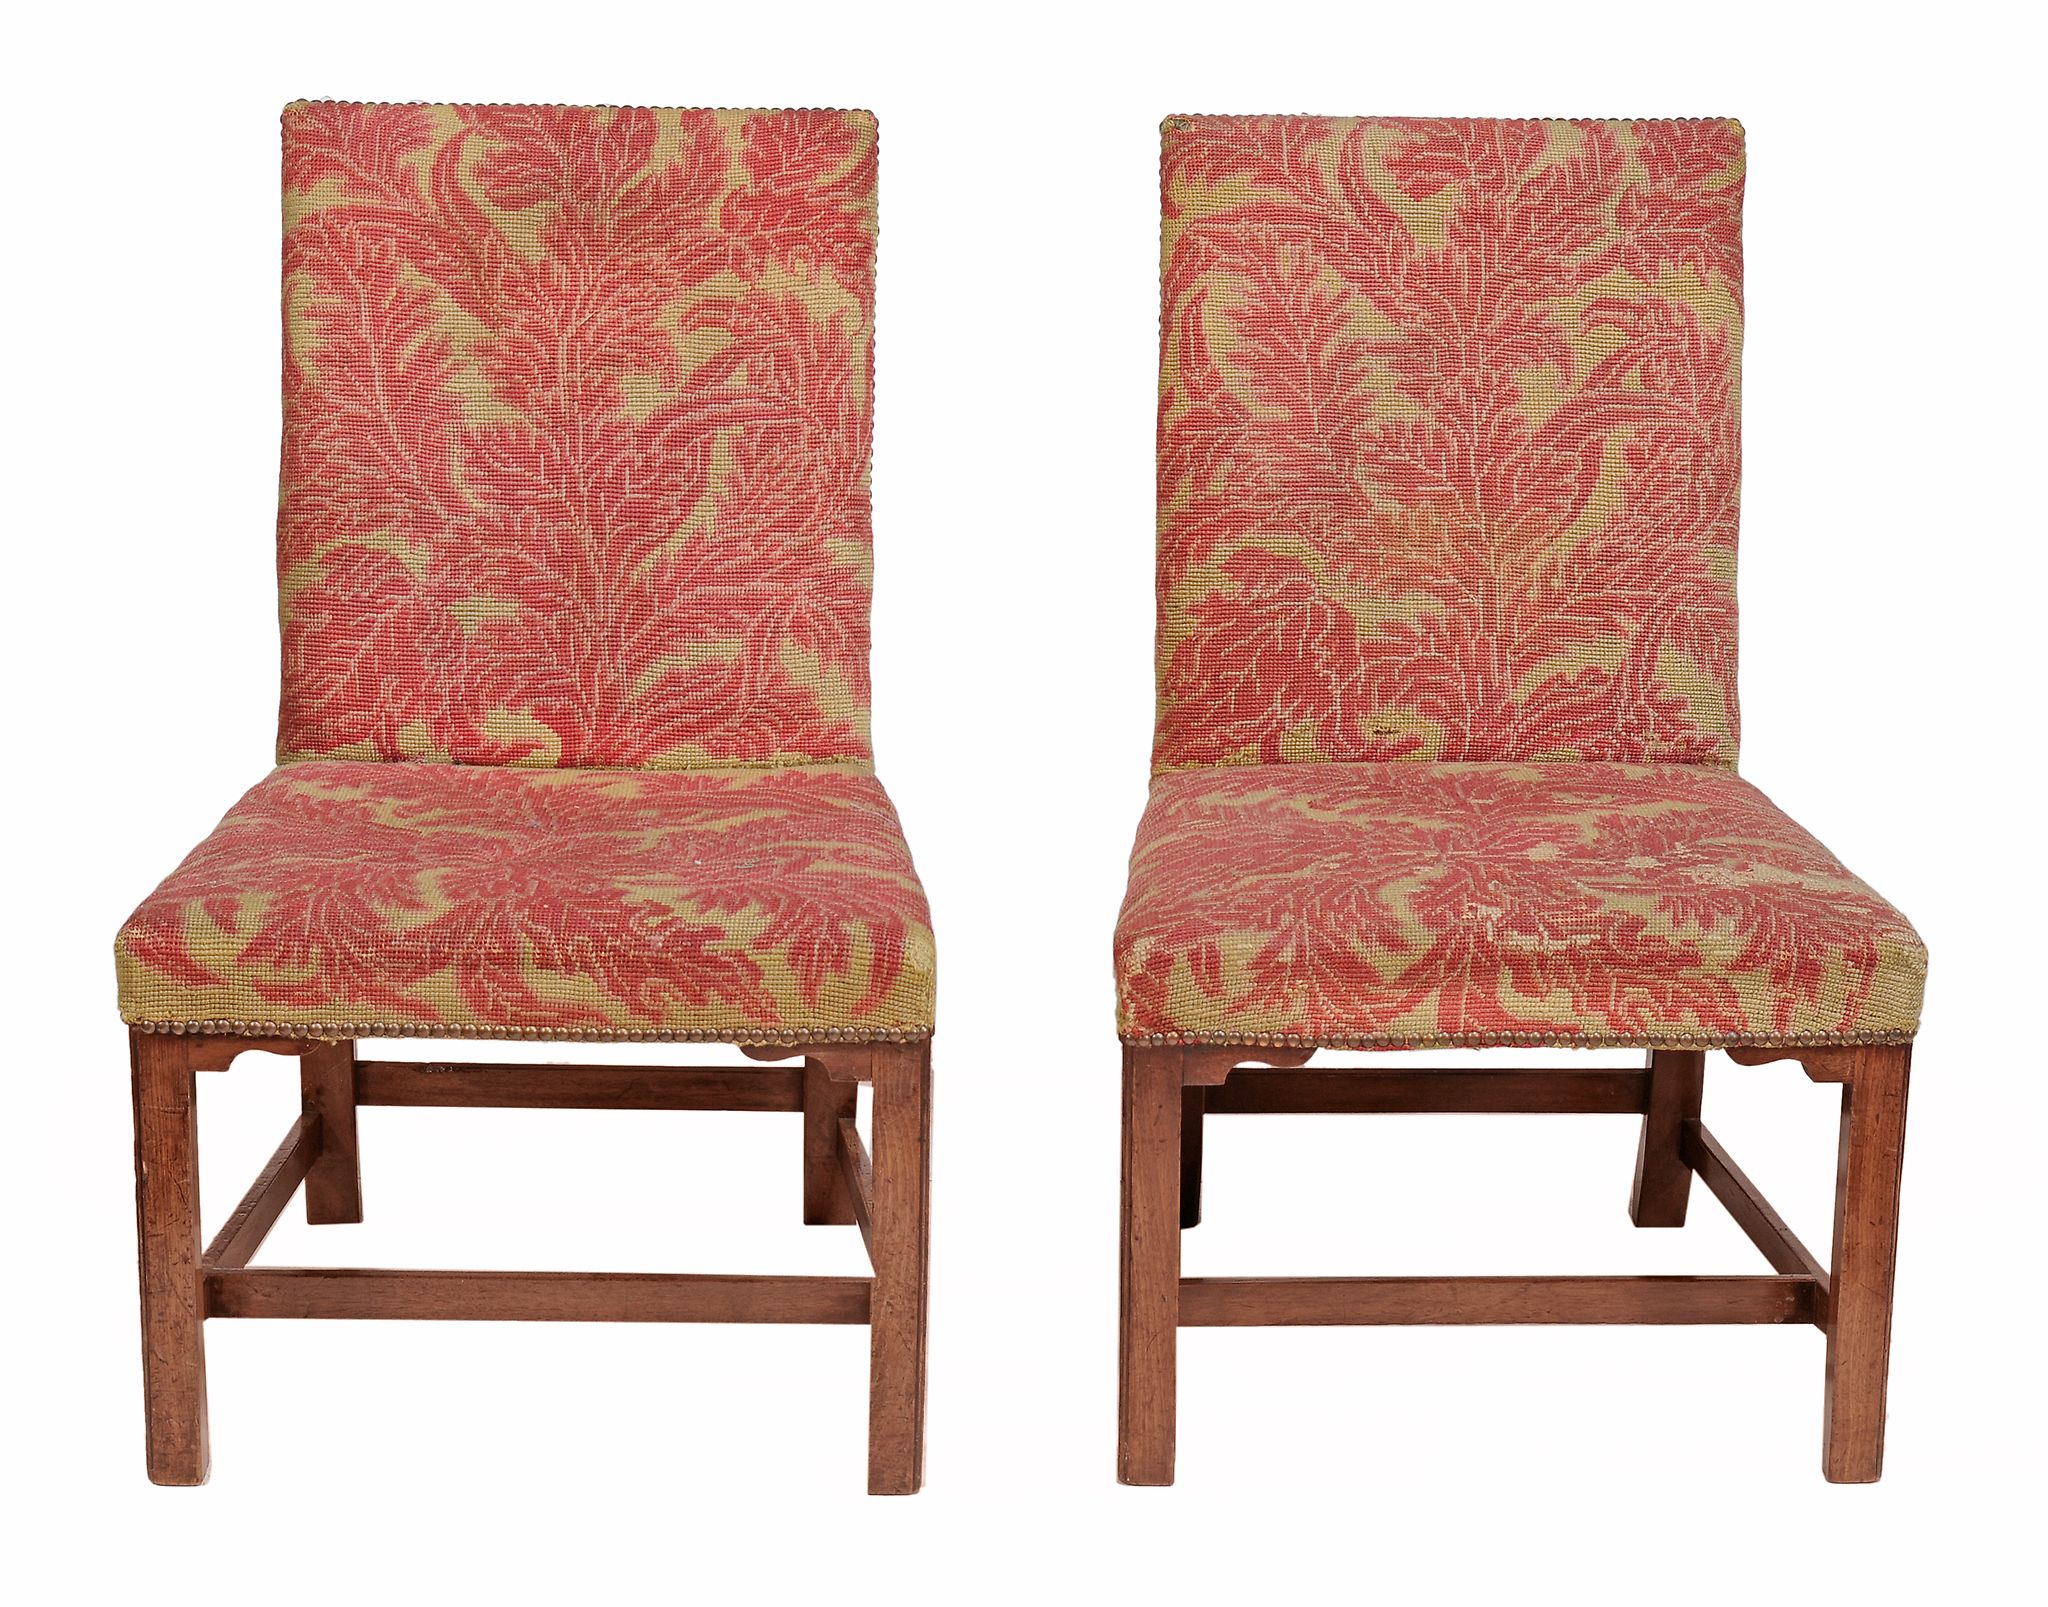 A pair of George III mahogany framed chairs  , circa 1770, with tapestry upholstered backs and